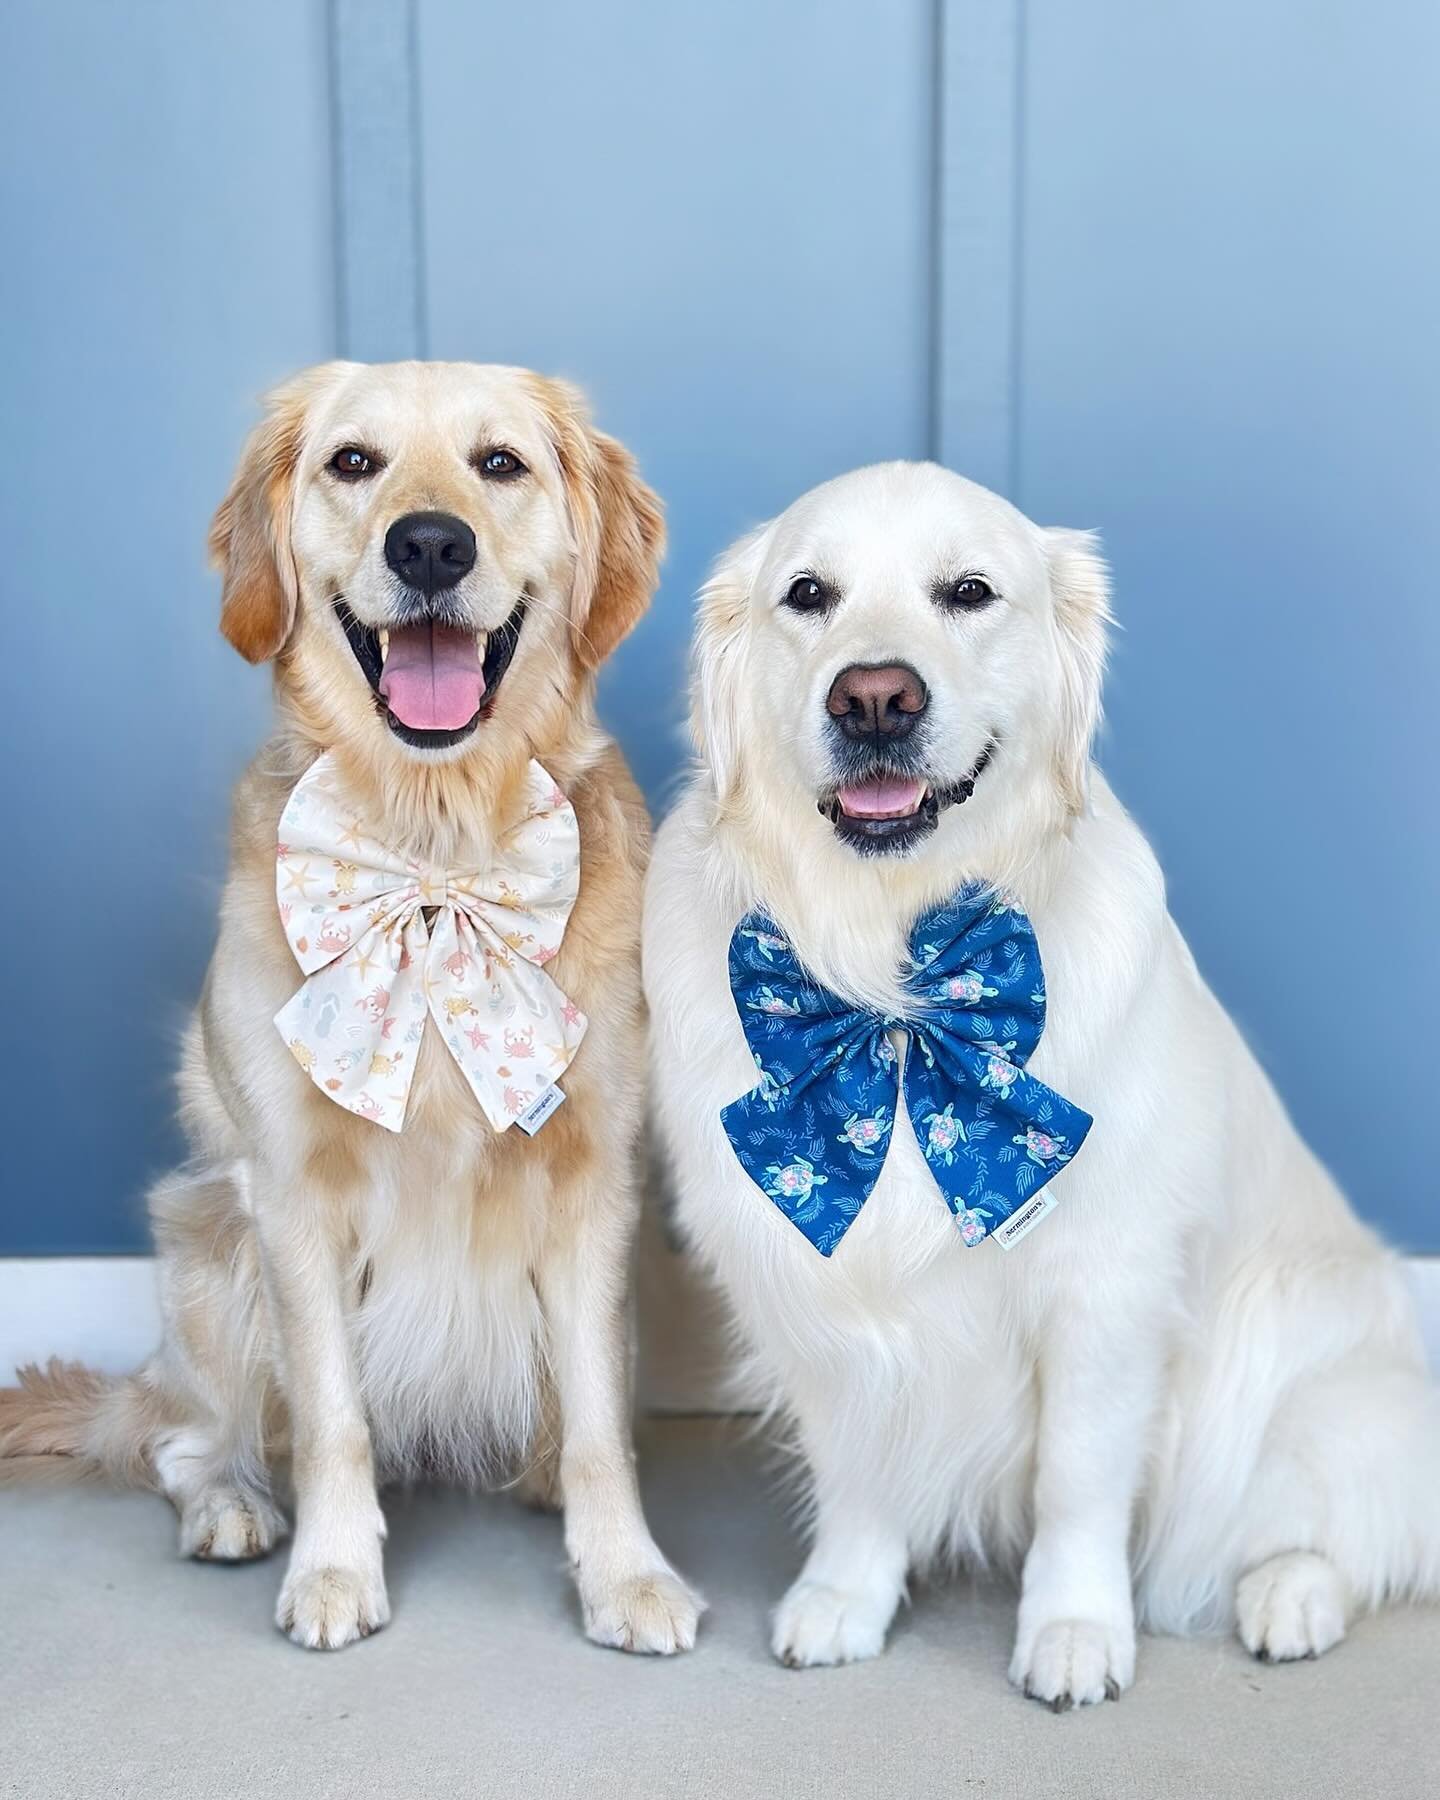 Summer smiles ☀️

Summer collection is available on our website 🏖️

🐶 @gvl_golden_girls is wearing Golden Bows (xl) is Shellabration &amp; Beach Bum.
.
.
.
.
.
.
#dogaccessories #dogbusiness #doggystyles #dogsinbowties #petaccessories #dogsofgreenv